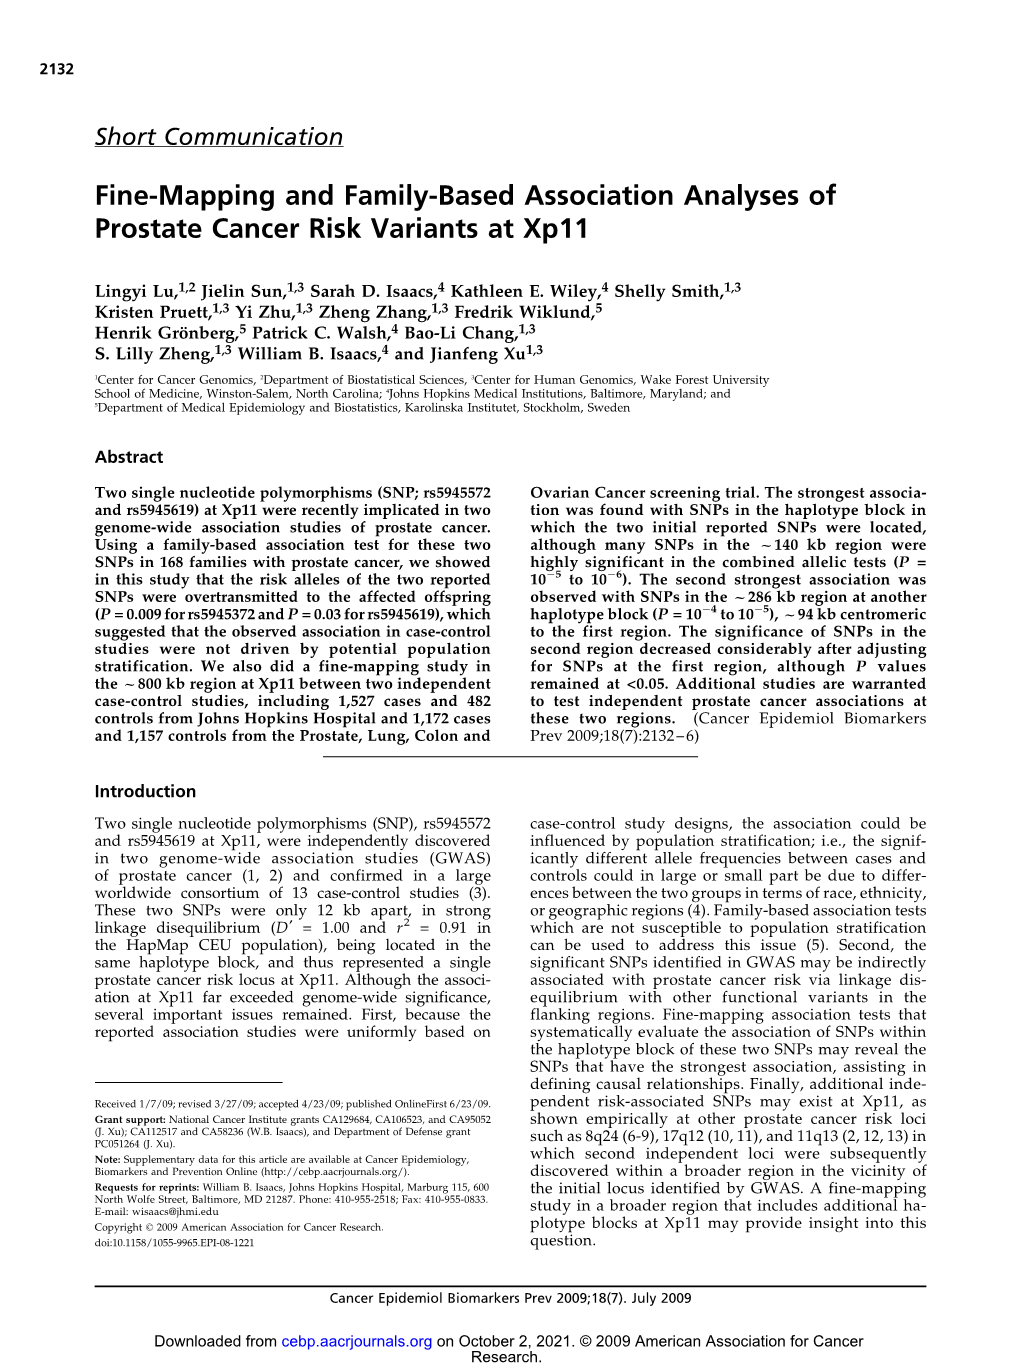 Fine-Mapping and Family-Based Association Analyses of Prostate Cancer Risk Variants at Xp11